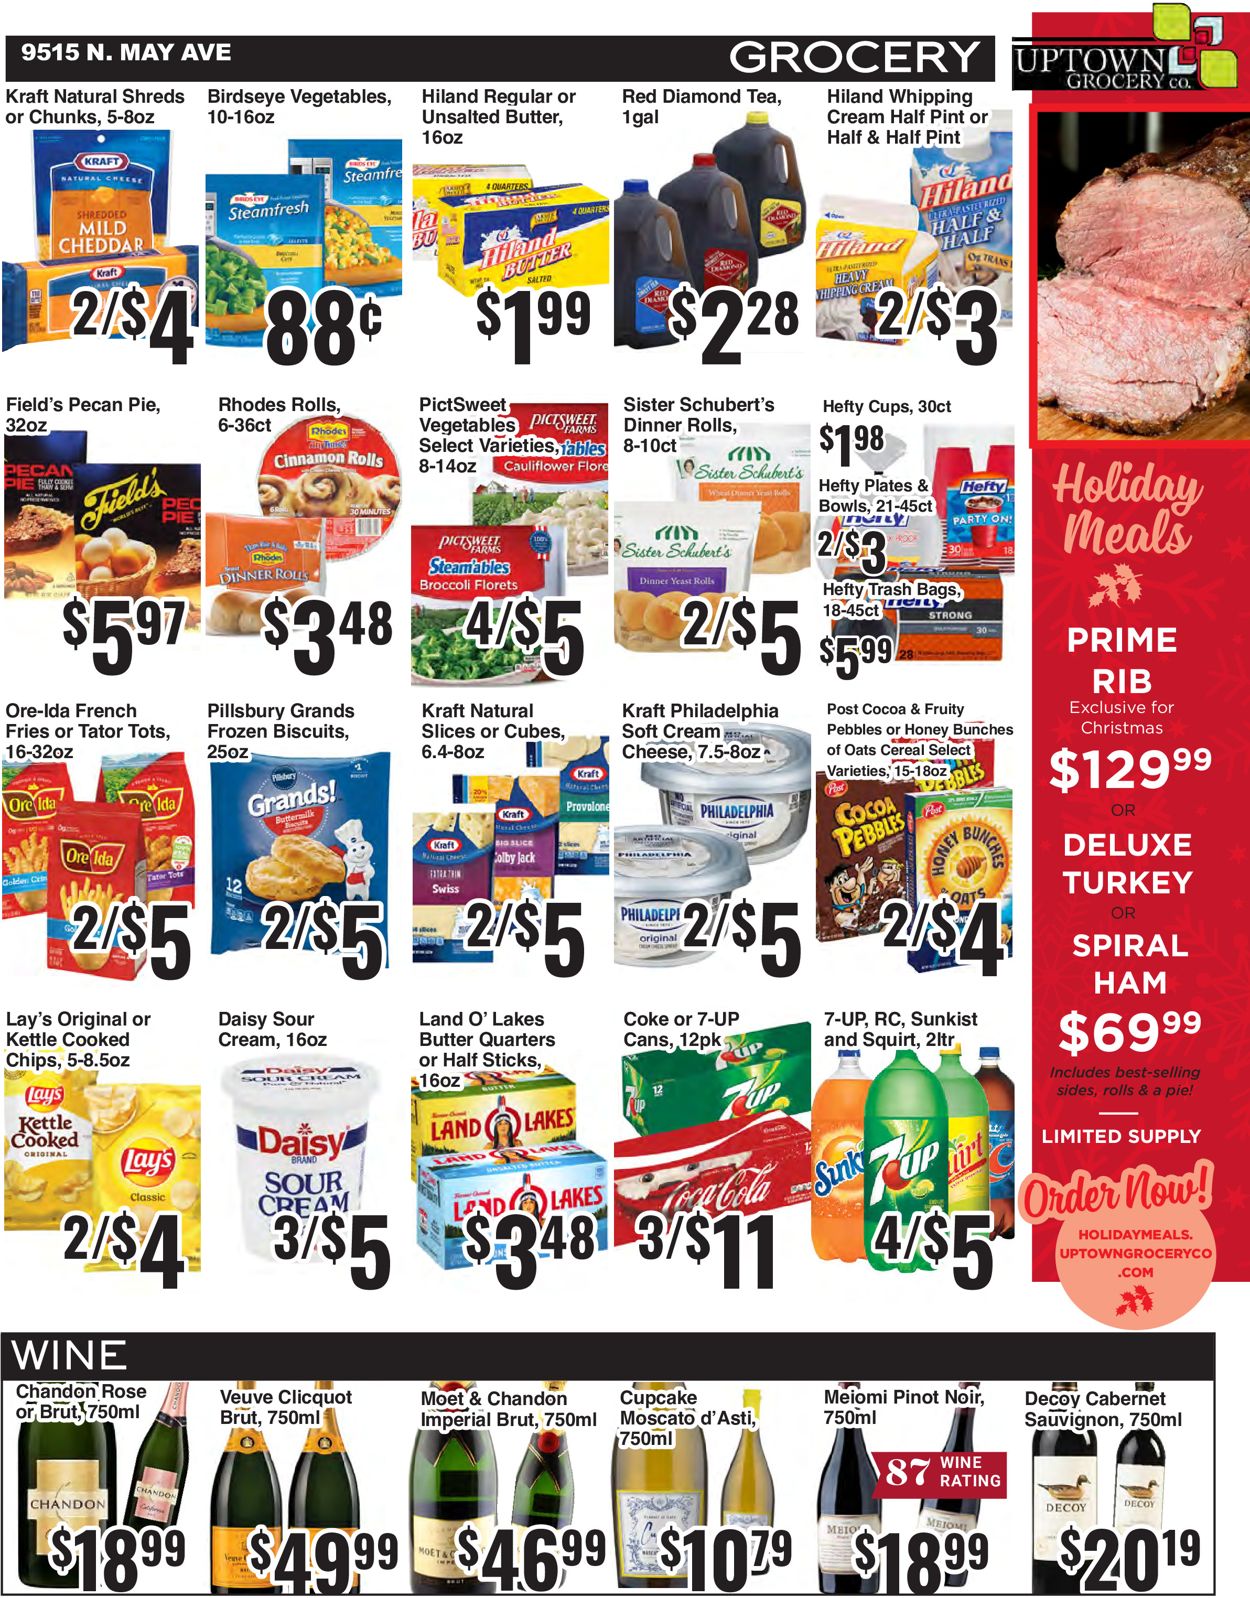 Uptown Grocery Co. Weekly Ad Circular - valid 12/16-12/25/2020 (Page 3)